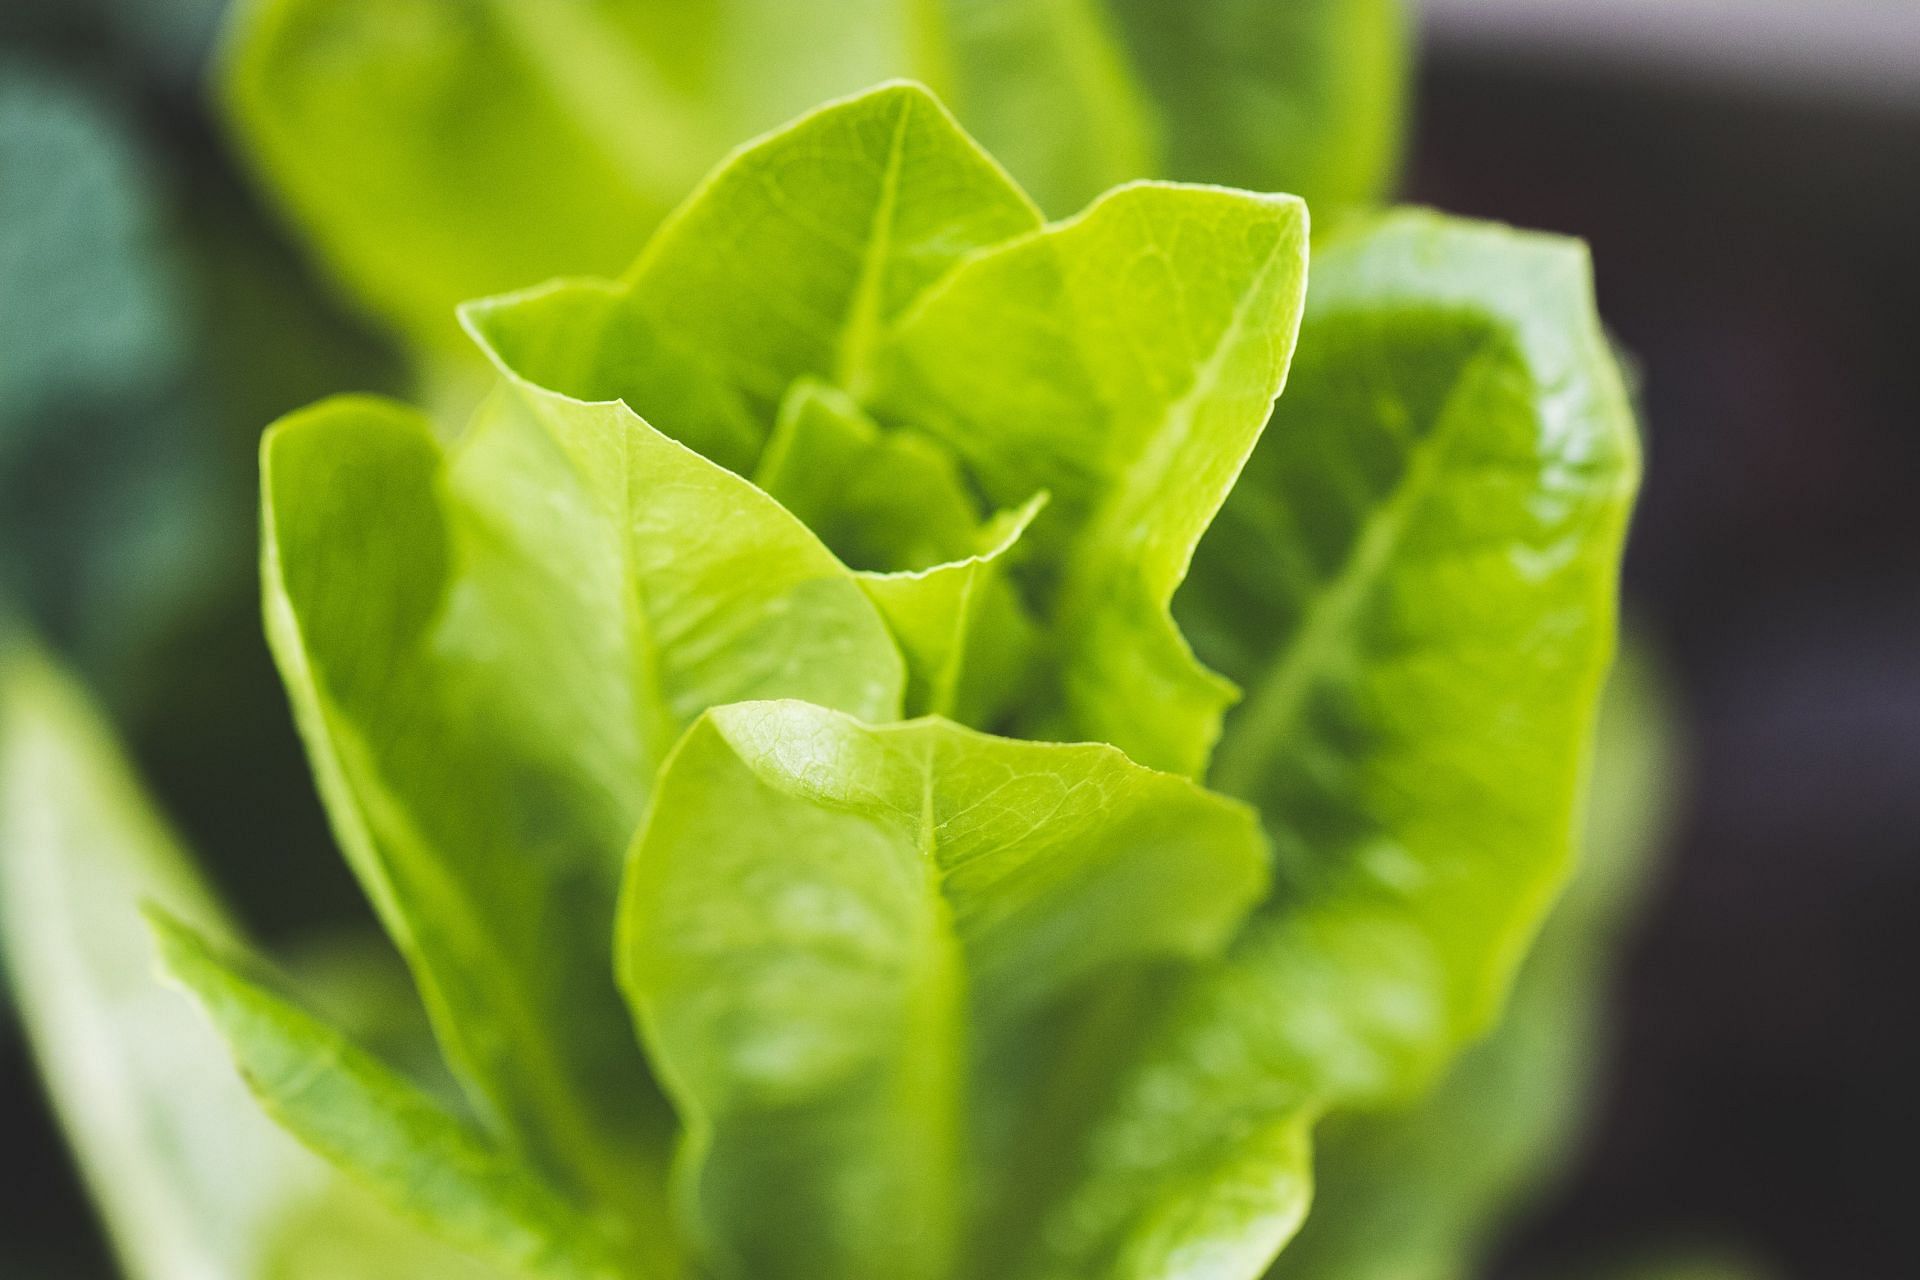 Romaine lettuce nutrition facts and health benefits (Image via Unsplash/Stephanie Moody)